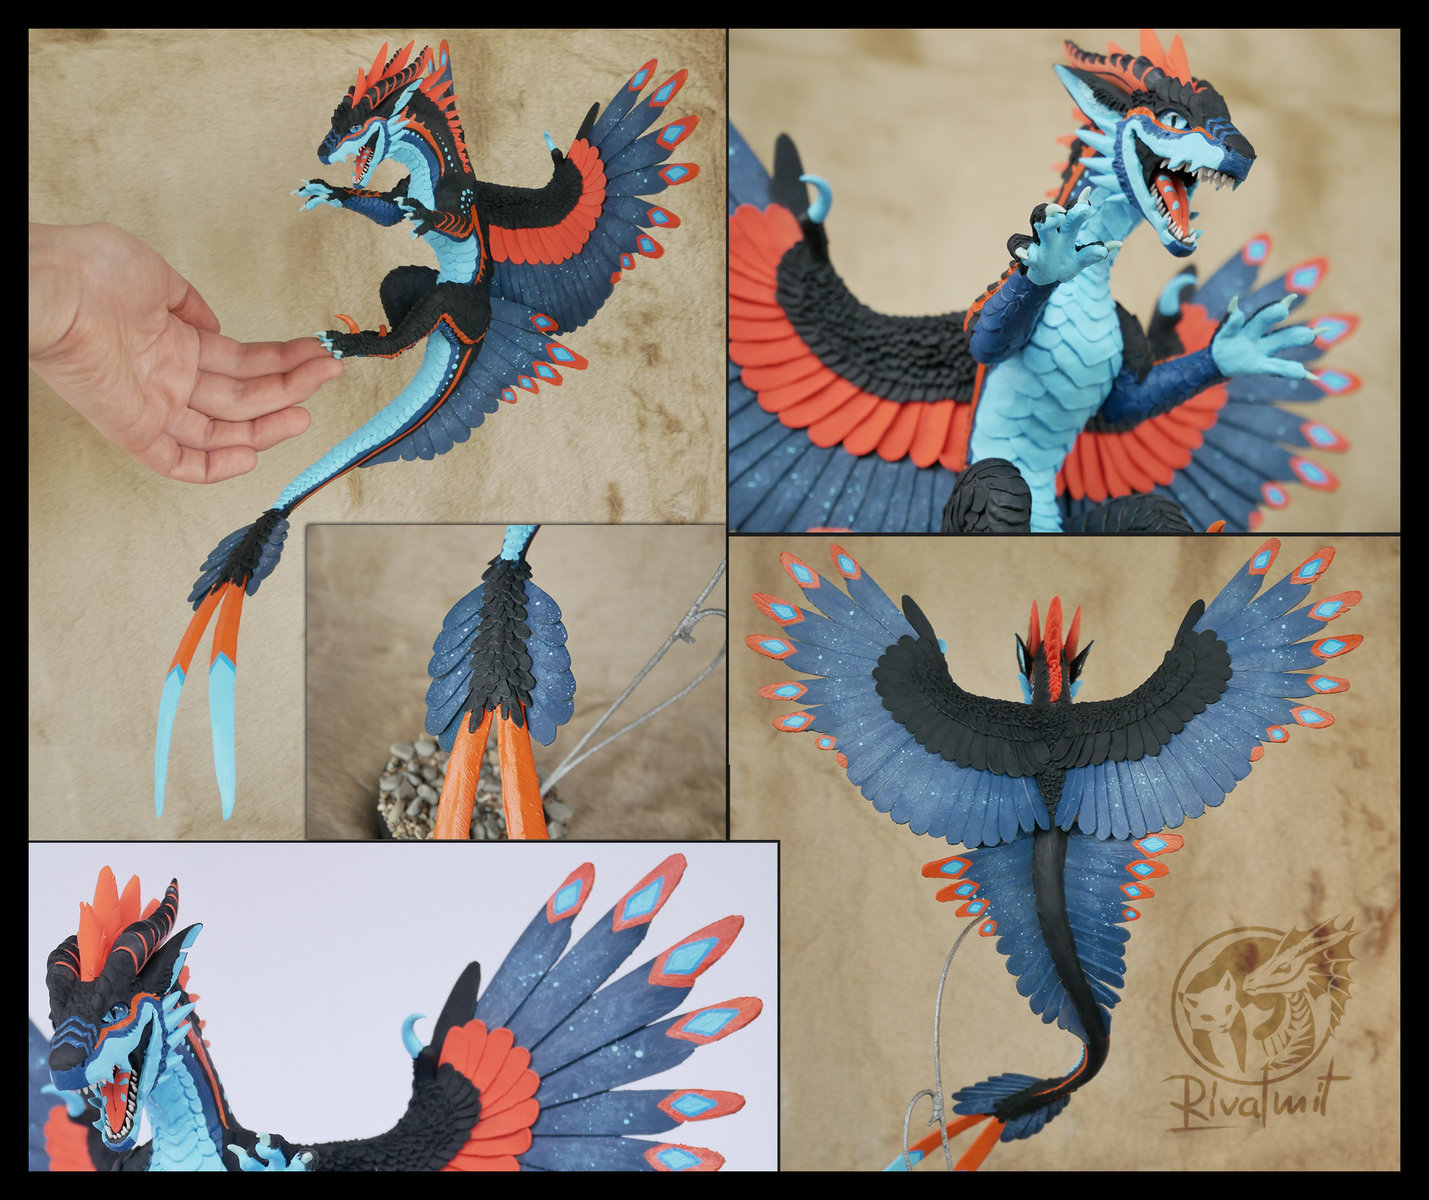 sculpture companion dragon feather balaning art traditional Sykress commissioned Companion